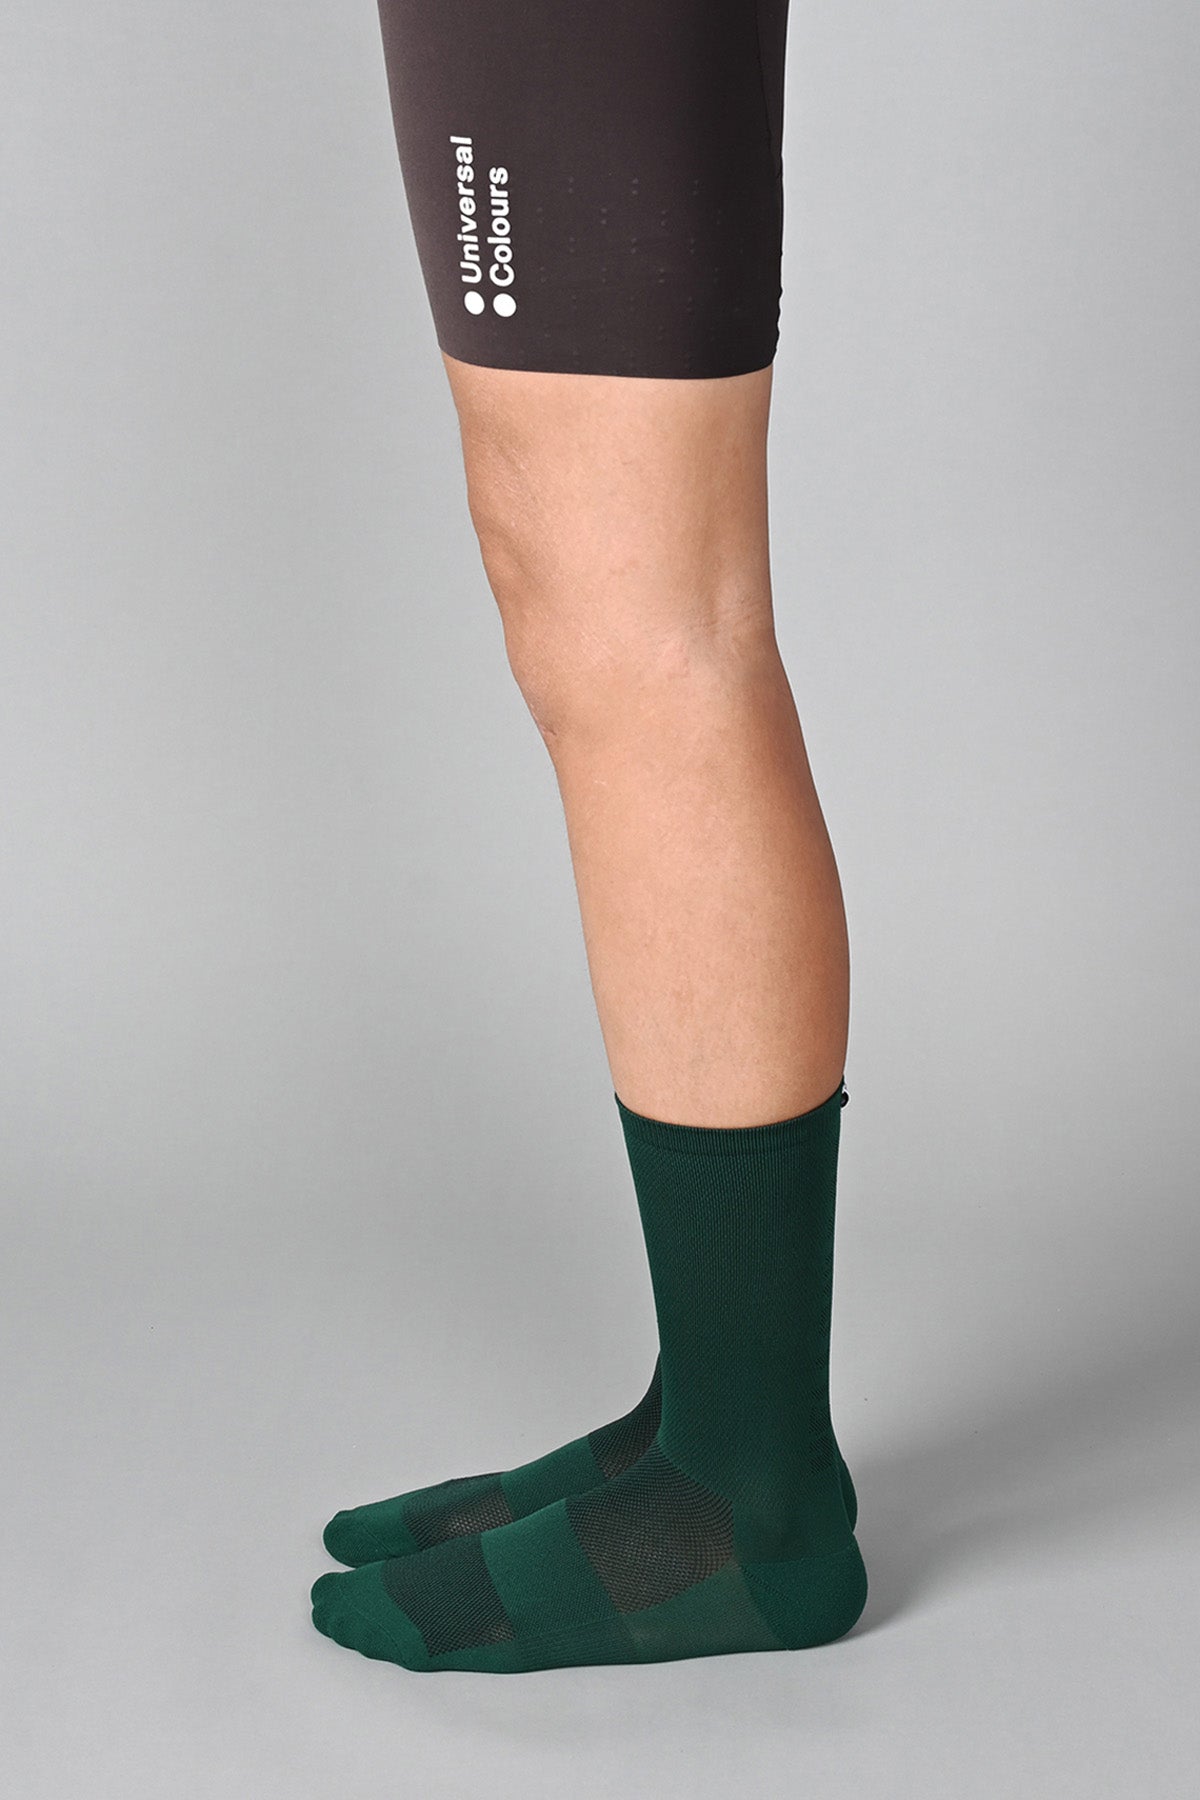 STEALTH - ENGLISH GREEN SIDE | BEST CYCLING SOCKS